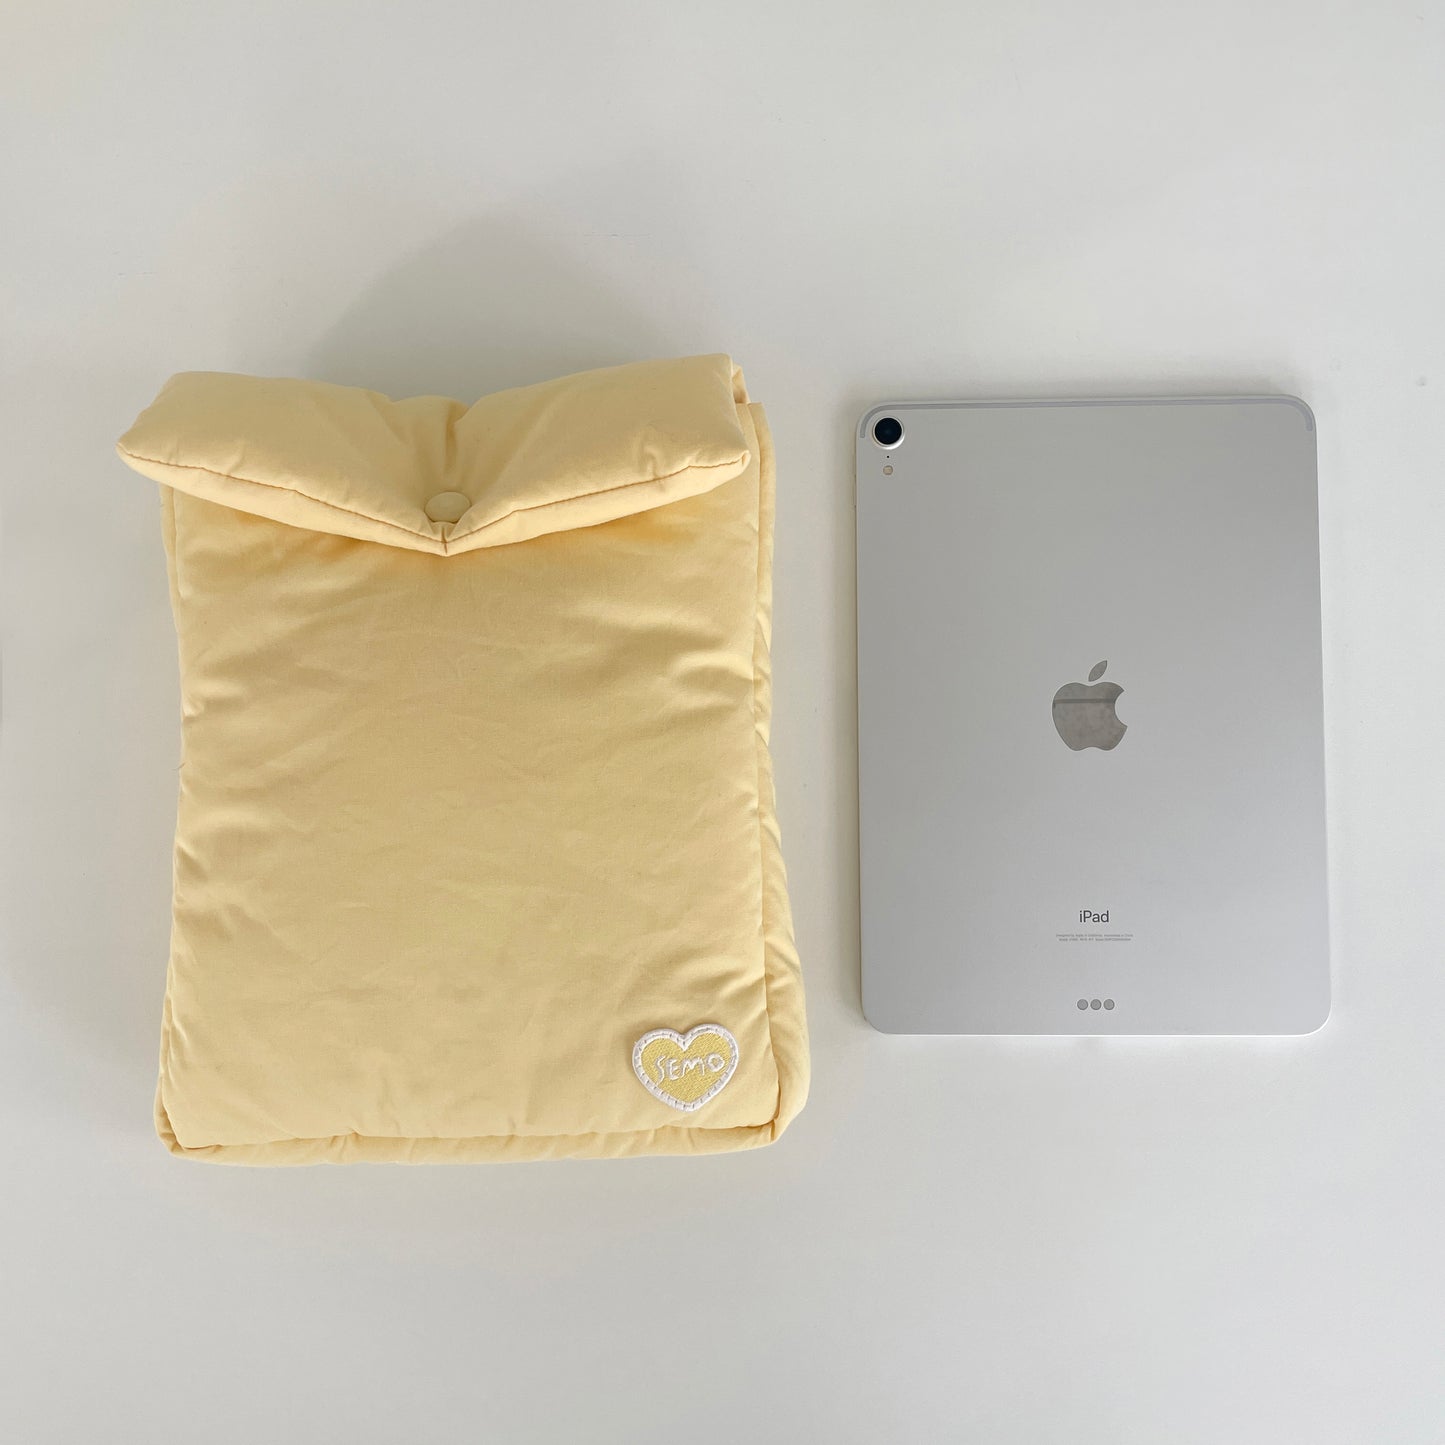 SECOND MORNING Fluffy iPad Pouch